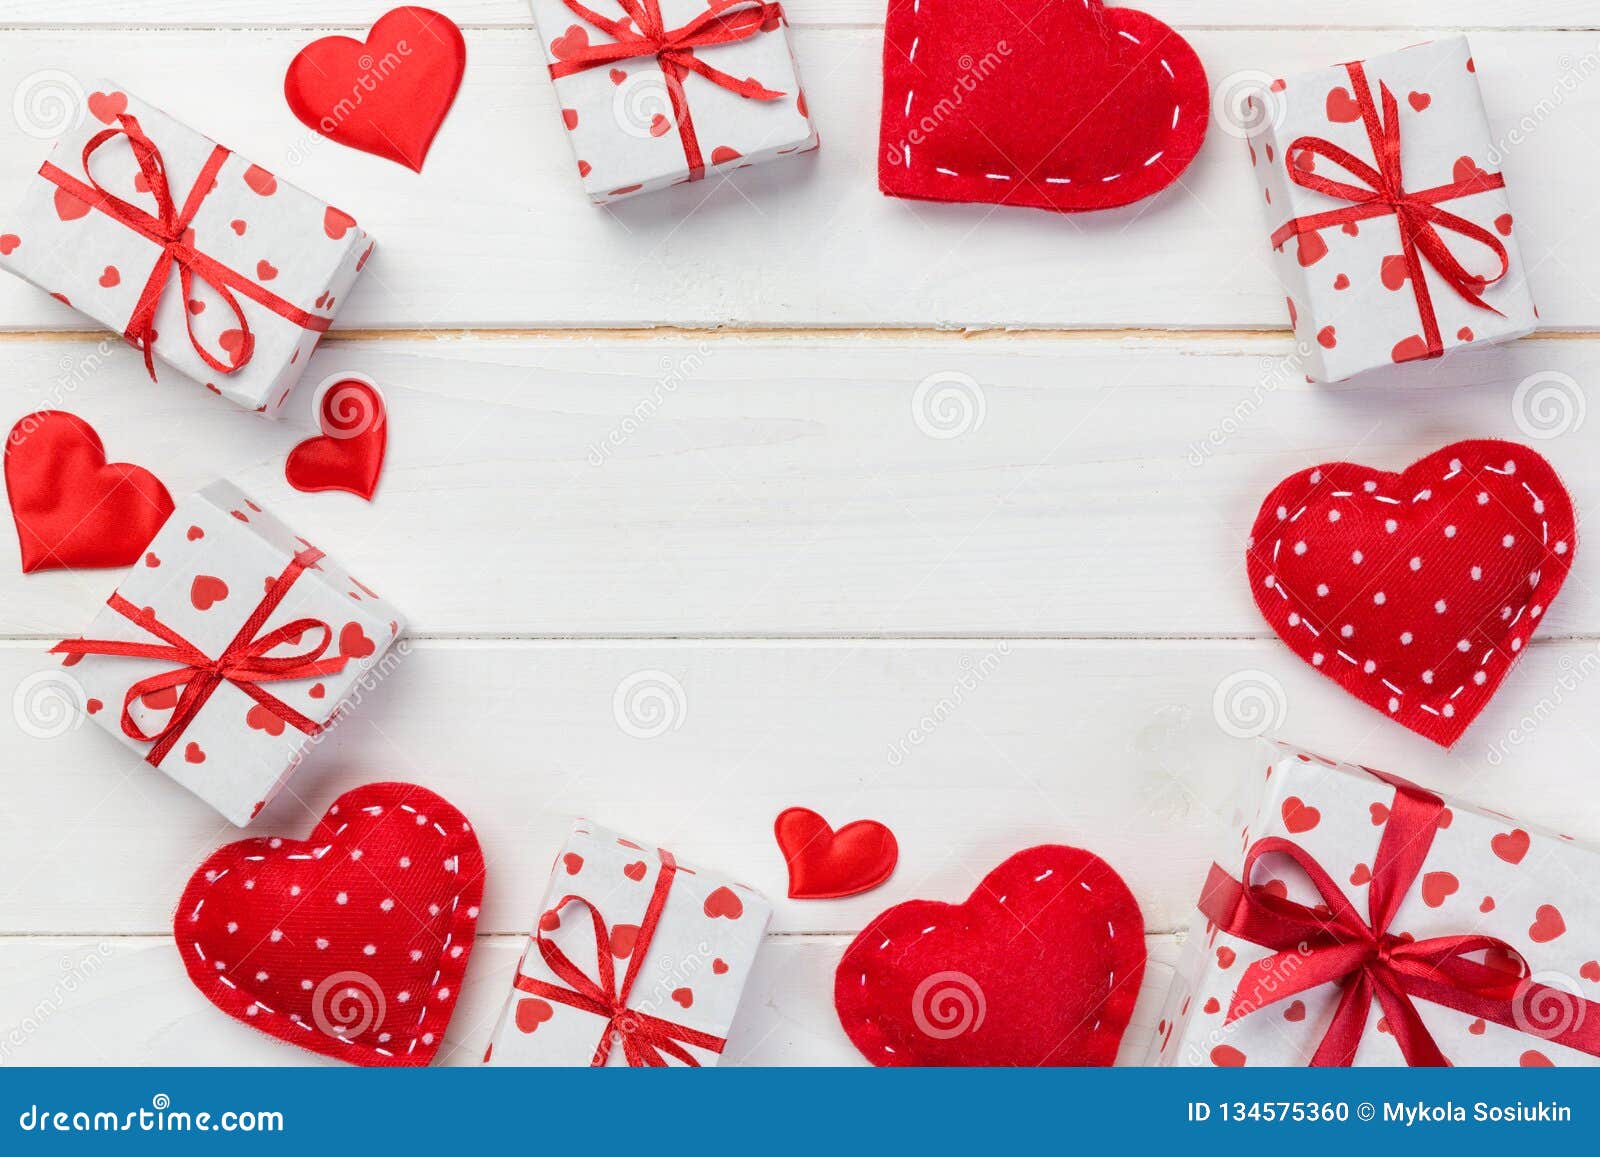 Valentine or Other Holiday Handmade Present in Paper with Red Hearts ...